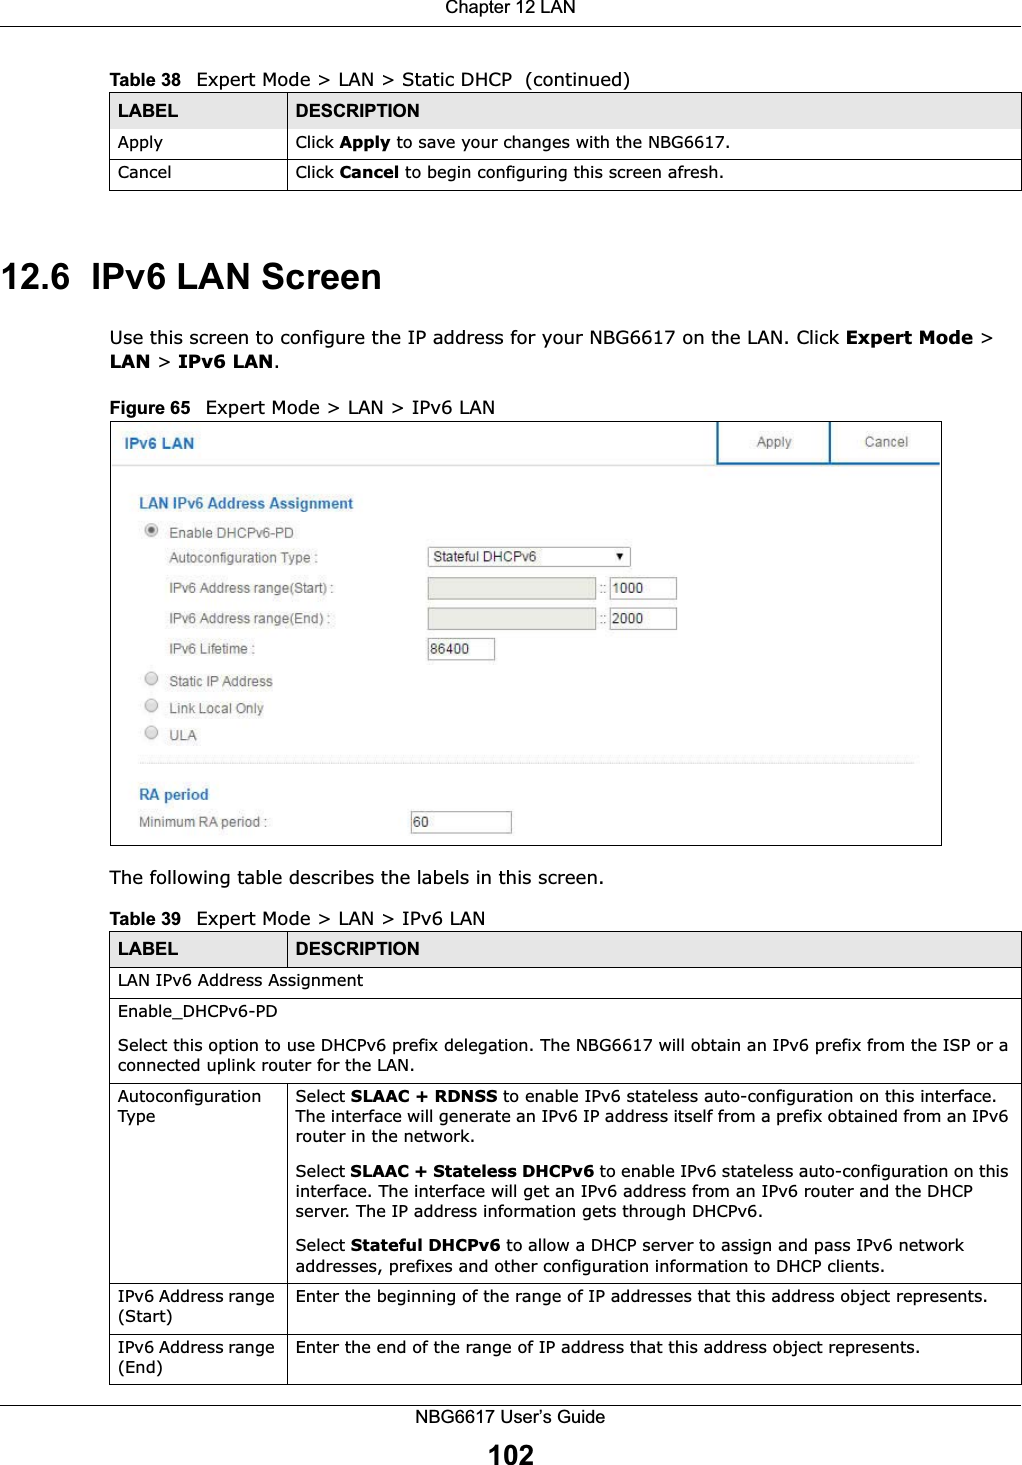 Chapter 12 LANNBG6617 User’s Guide10212.6  IPv6 LAN ScreenUse this screen to configure the IP address for your NBG6617 on the LAN. Click Expert Mode &gt; LAN &gt; IPv6 LAN.Figure 65   Expert Mode &gt; LAN &gt; IPv6 LAN The following table describes the labels in this screen.Apply Click Apply to save your changes with the NBG6617.Cancel Click Cancel to begin configuring this screen afresh.Table 38   Expert Mode &gt; LAN &gt; Static DHCP  (continued)LABEL DESCRIPTIONTable 39   Expert Mode &gt; LAN &gt; IPv6 LANLABEL DESCRIPTIONLAN IPv6 Address AssignmentEnable_DHCPv6-PD Select this option to use DHCPv6 prefix delegation. The NBG6617 will obtain an IPv6 prefix from the ISP or a connected uplink router for the LAN.Autoconfiguration TypeSelect SLAAC + RDNSS to enable IPv6 stateless auto-configuration on this interface. The interface will generate an IPv6 IP address itself from a prefix obtained from an IPv6 router in the network.Select SLAAC + Stateless DHCPv6 to enable IPv6 stateless auto-configuration on this interface. The interface will get an IPv6 address from an IPv6 router and the DHCP server. The IP address information gets through DHCPv6.Select Stateful DHCPv6 to allow a DHCP server to assign and pass IPv6 network addresses, prefixes and other configuration information to DHCP clients.IPv6 Address range (Start)Enter the beginning of the range of IP addresses that this address object represents.IPv6 Address range (End) Enter the end of the range of IP address that this address object represents.